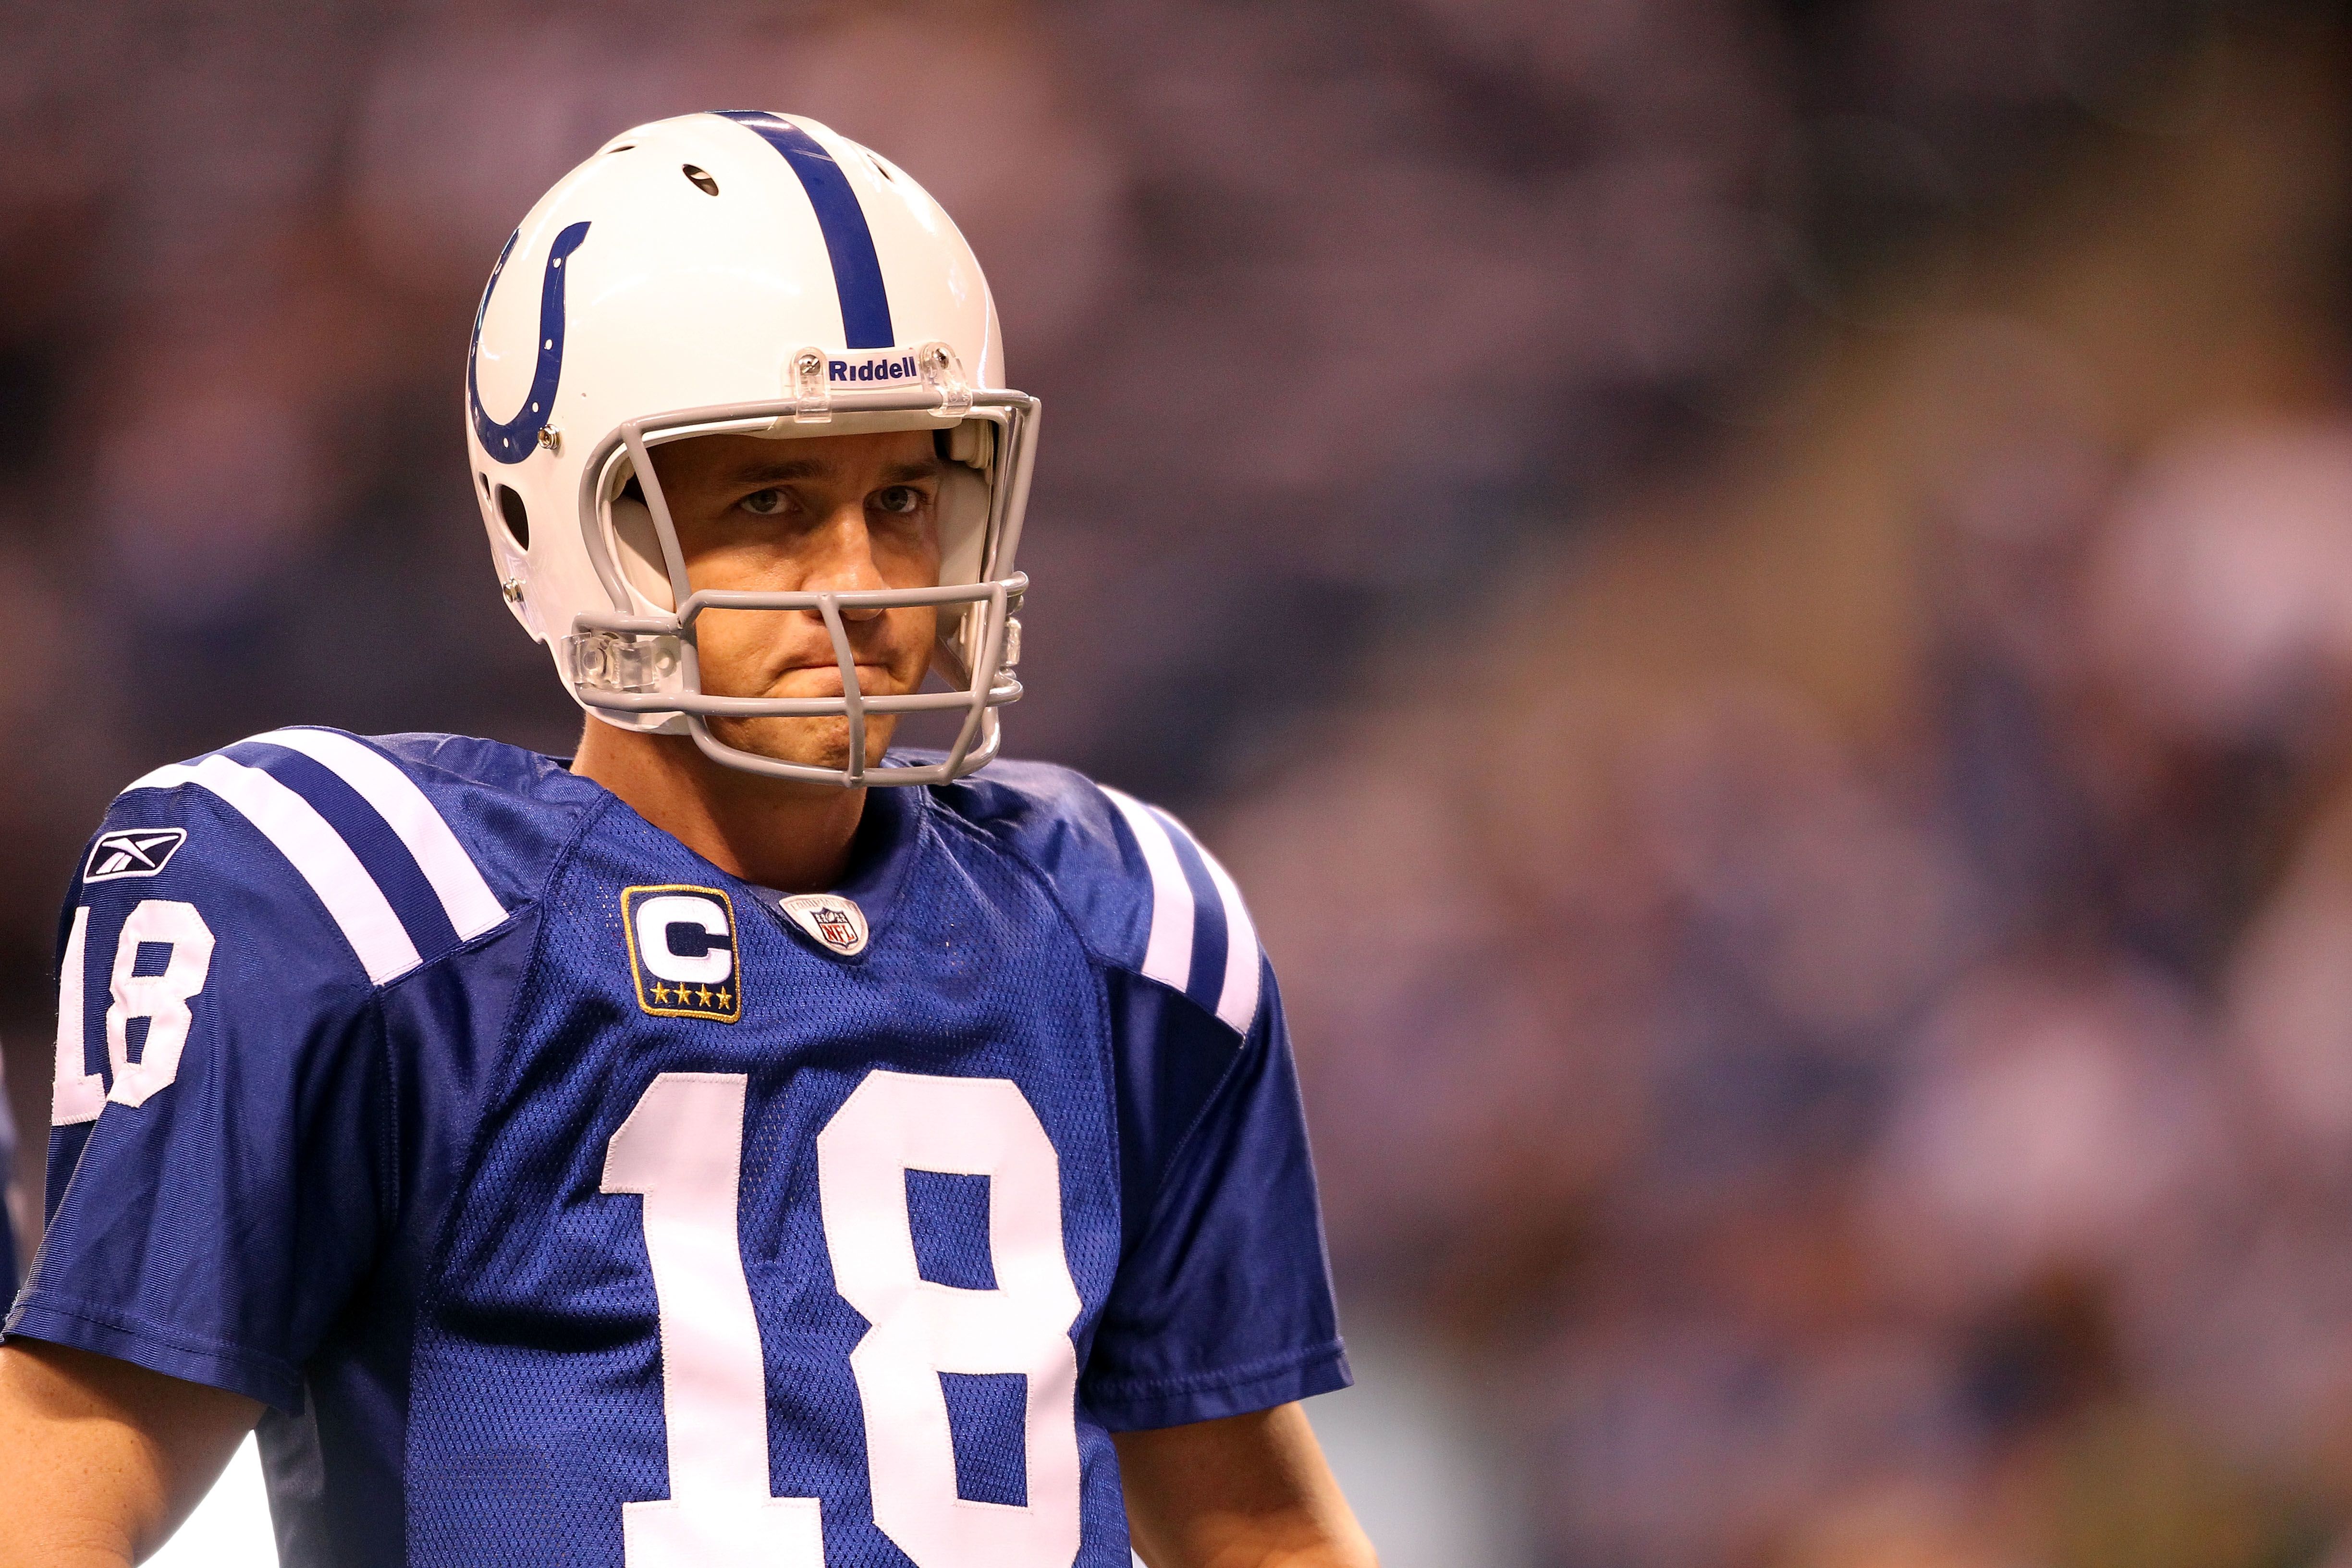 Has Peyton Manning played his last game for the Colts?